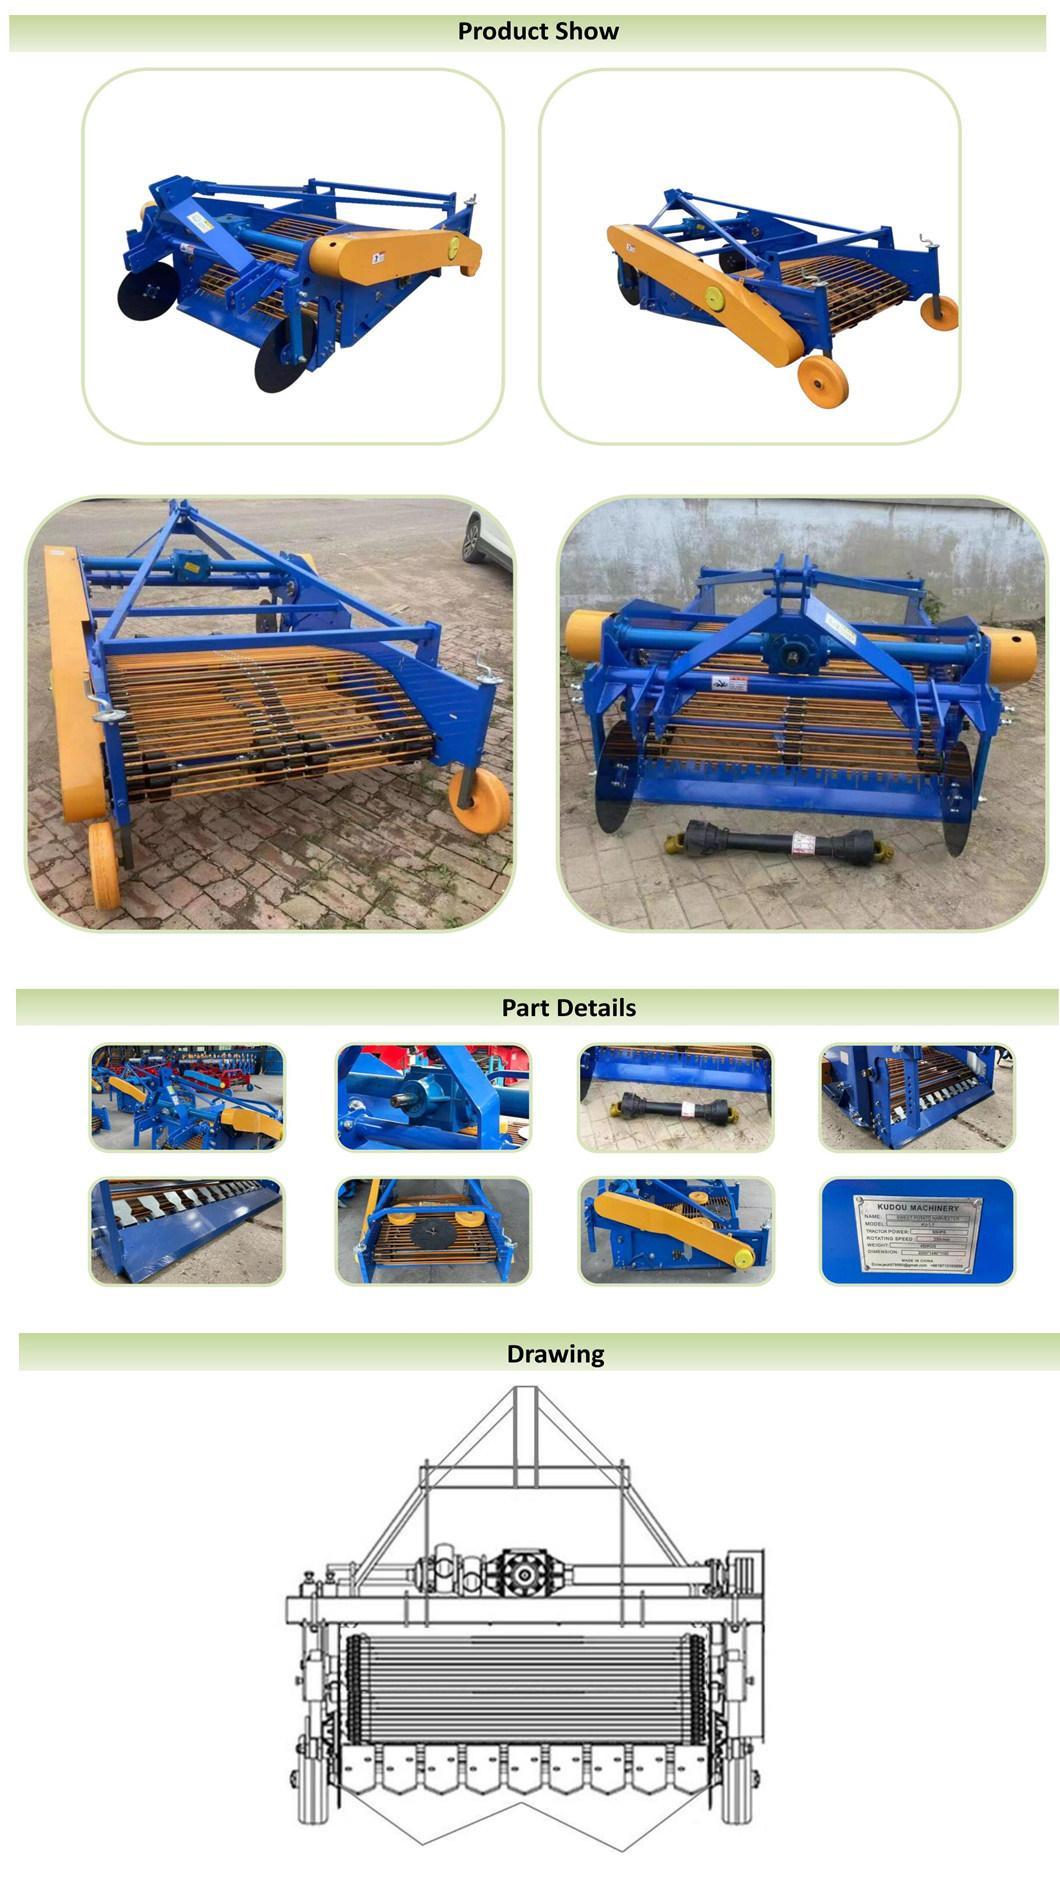 China Factory Sell New Type Sweet Potato Digger Onion Beet Harvesting Machine Potato Harvester with Low Price